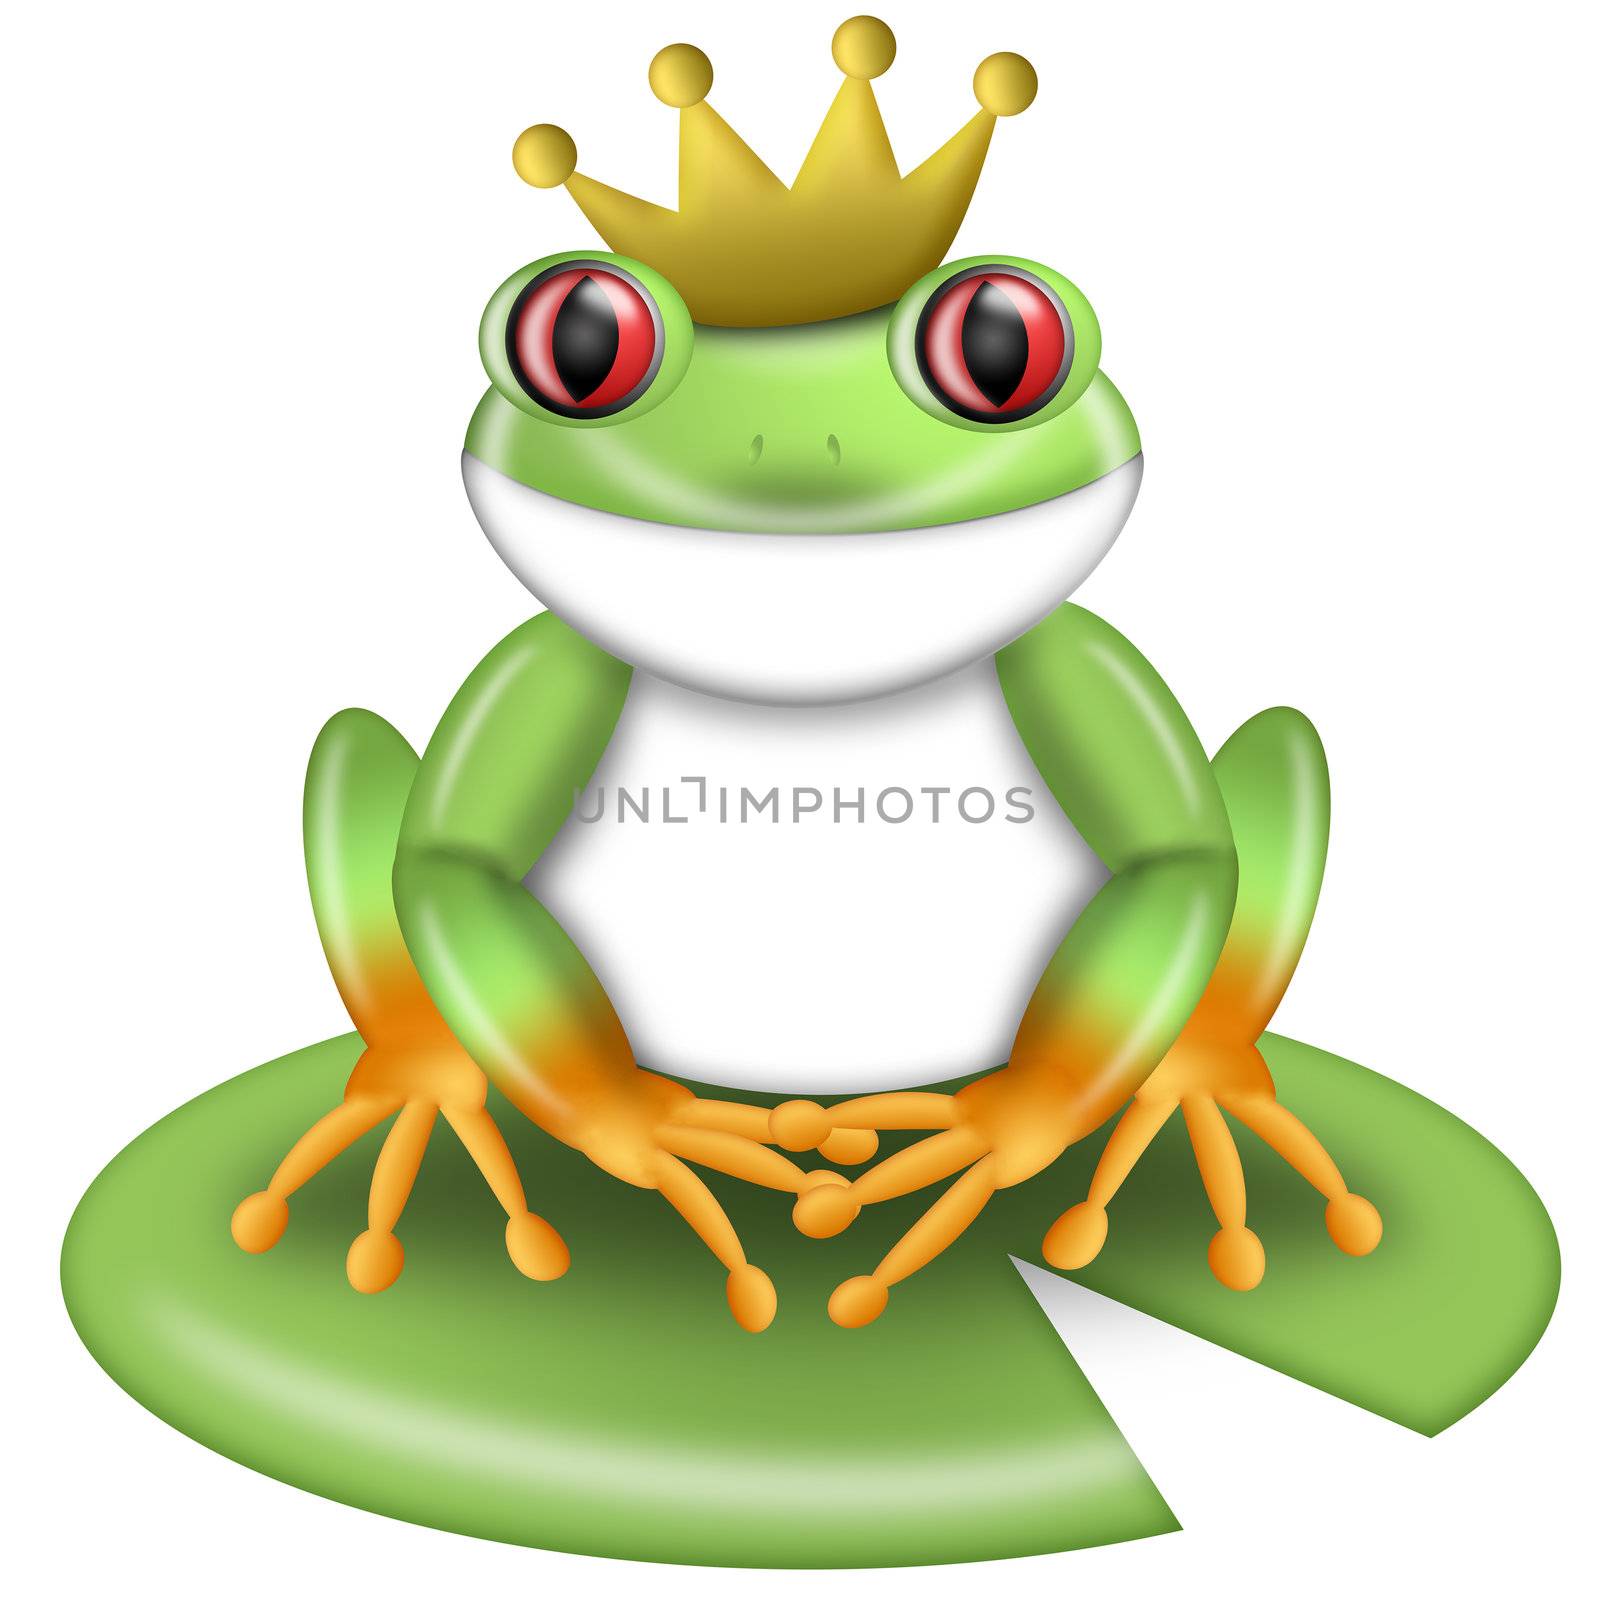 Red-Eyed Green Tree Frog Prince with Crown on Lilypad Illustration